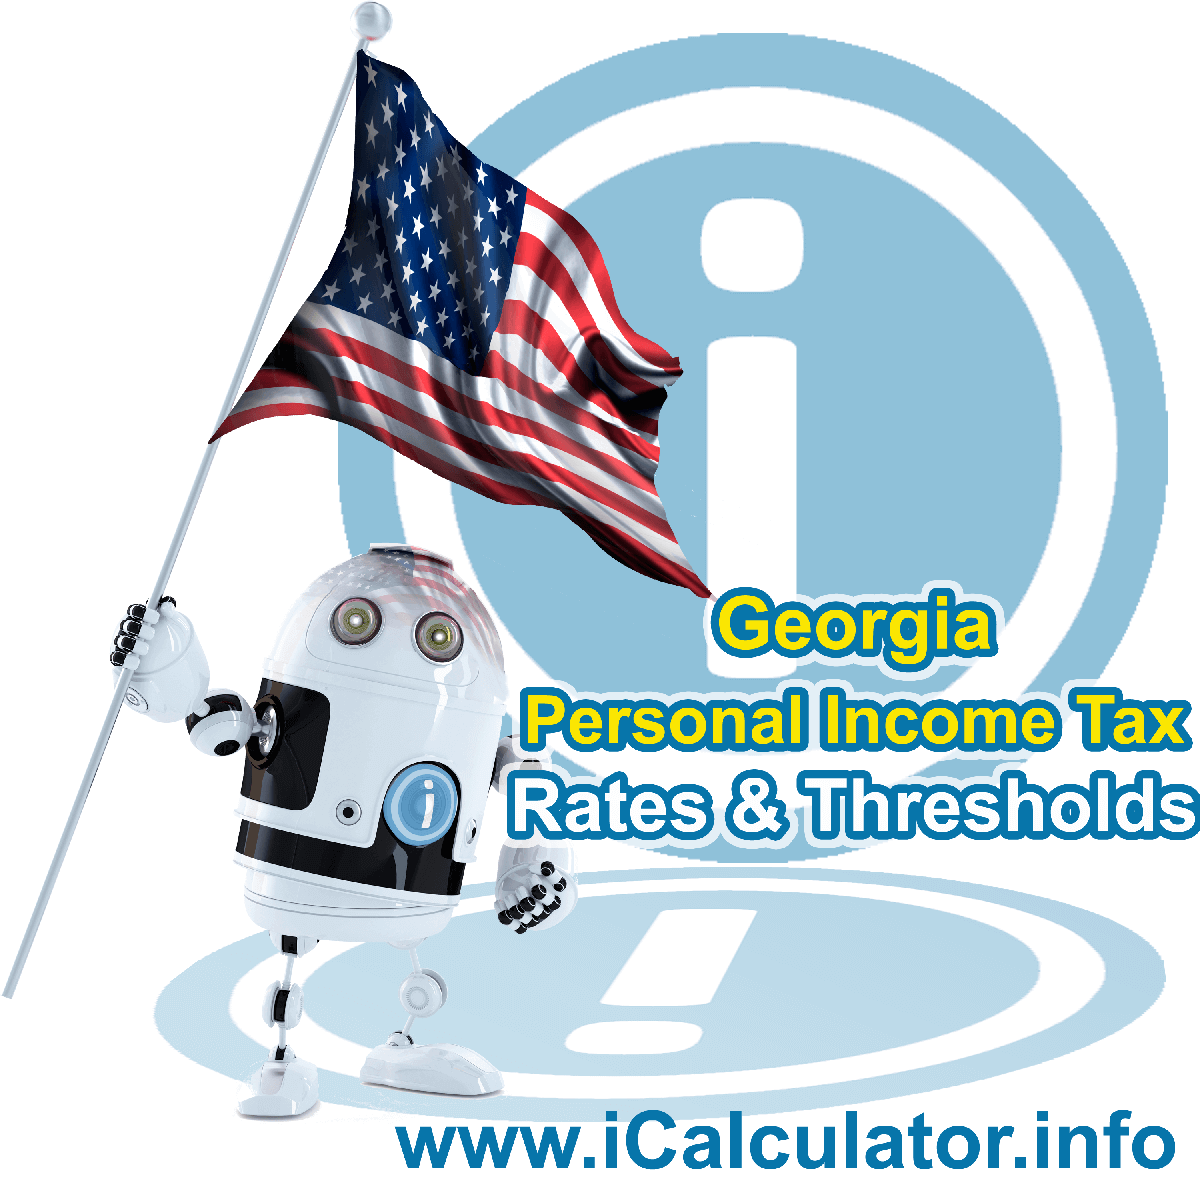 Georgia State Tax Tables 2023. This image displays details of the Georgia State Tax Tables for the 2023 tax return year which is provided in support of the 2023 US Tax Calculator